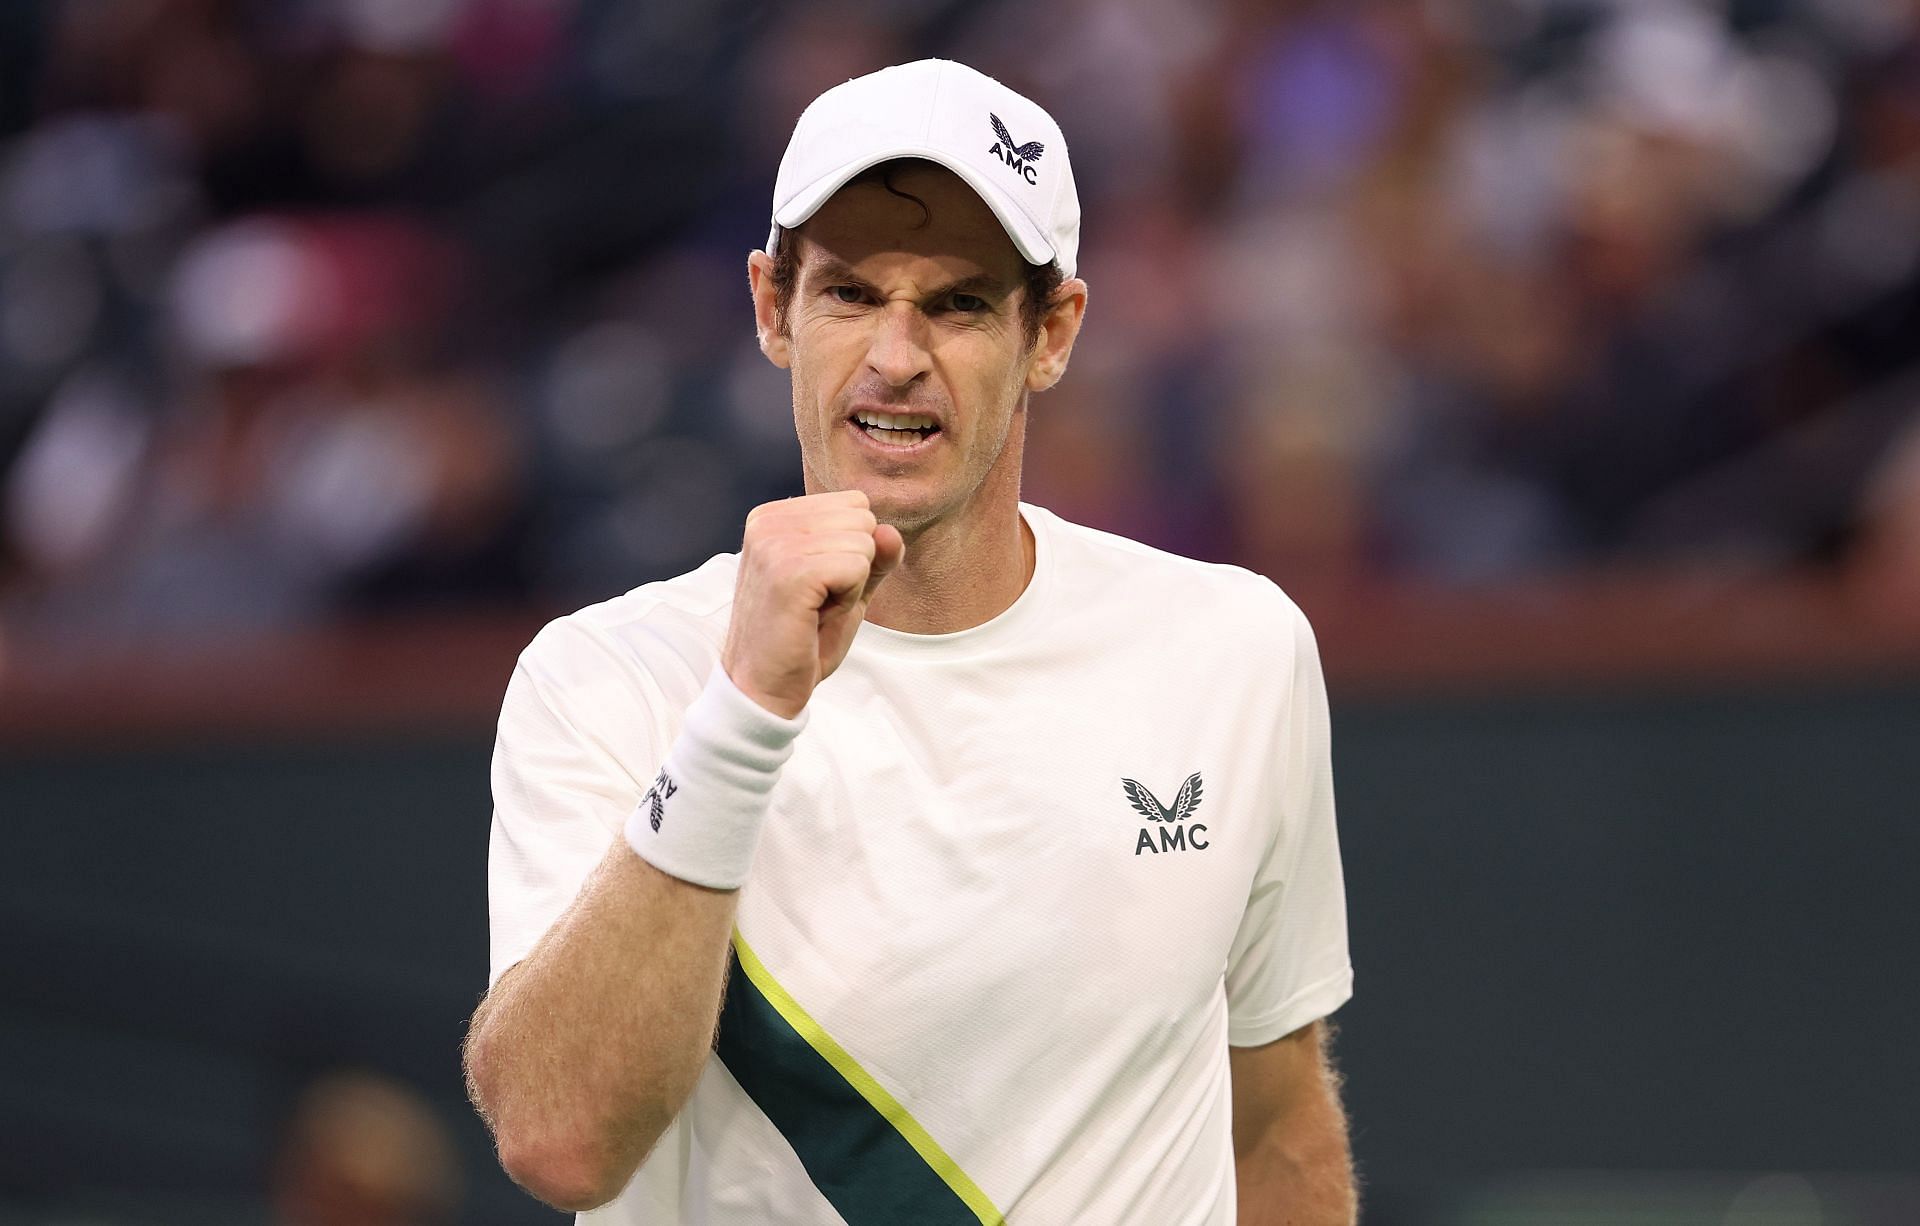 Andy Murray at the BNP Paribas Open